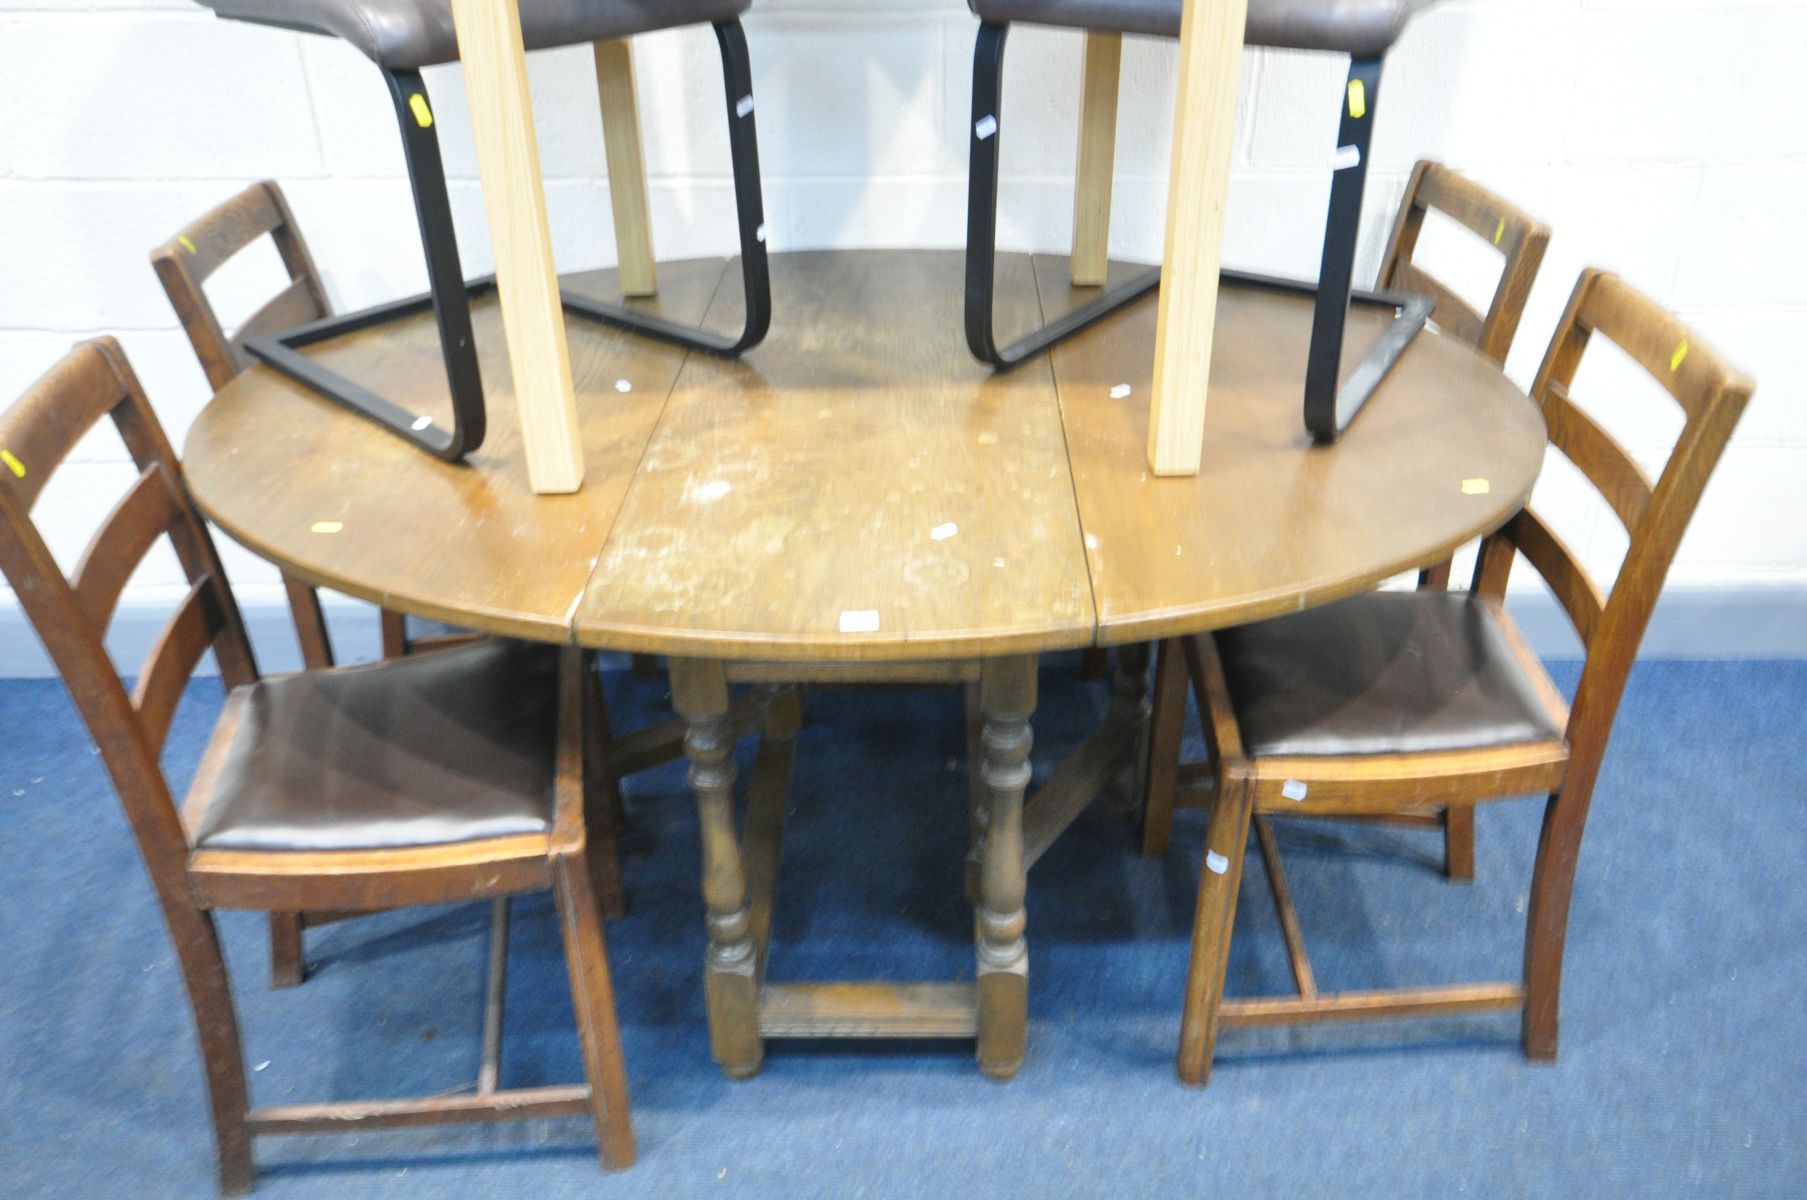 AN MODERN BEECH DINING TABLE, two grey leatherette chairs, along with oak gate leg table, and four - Image 3 of 3